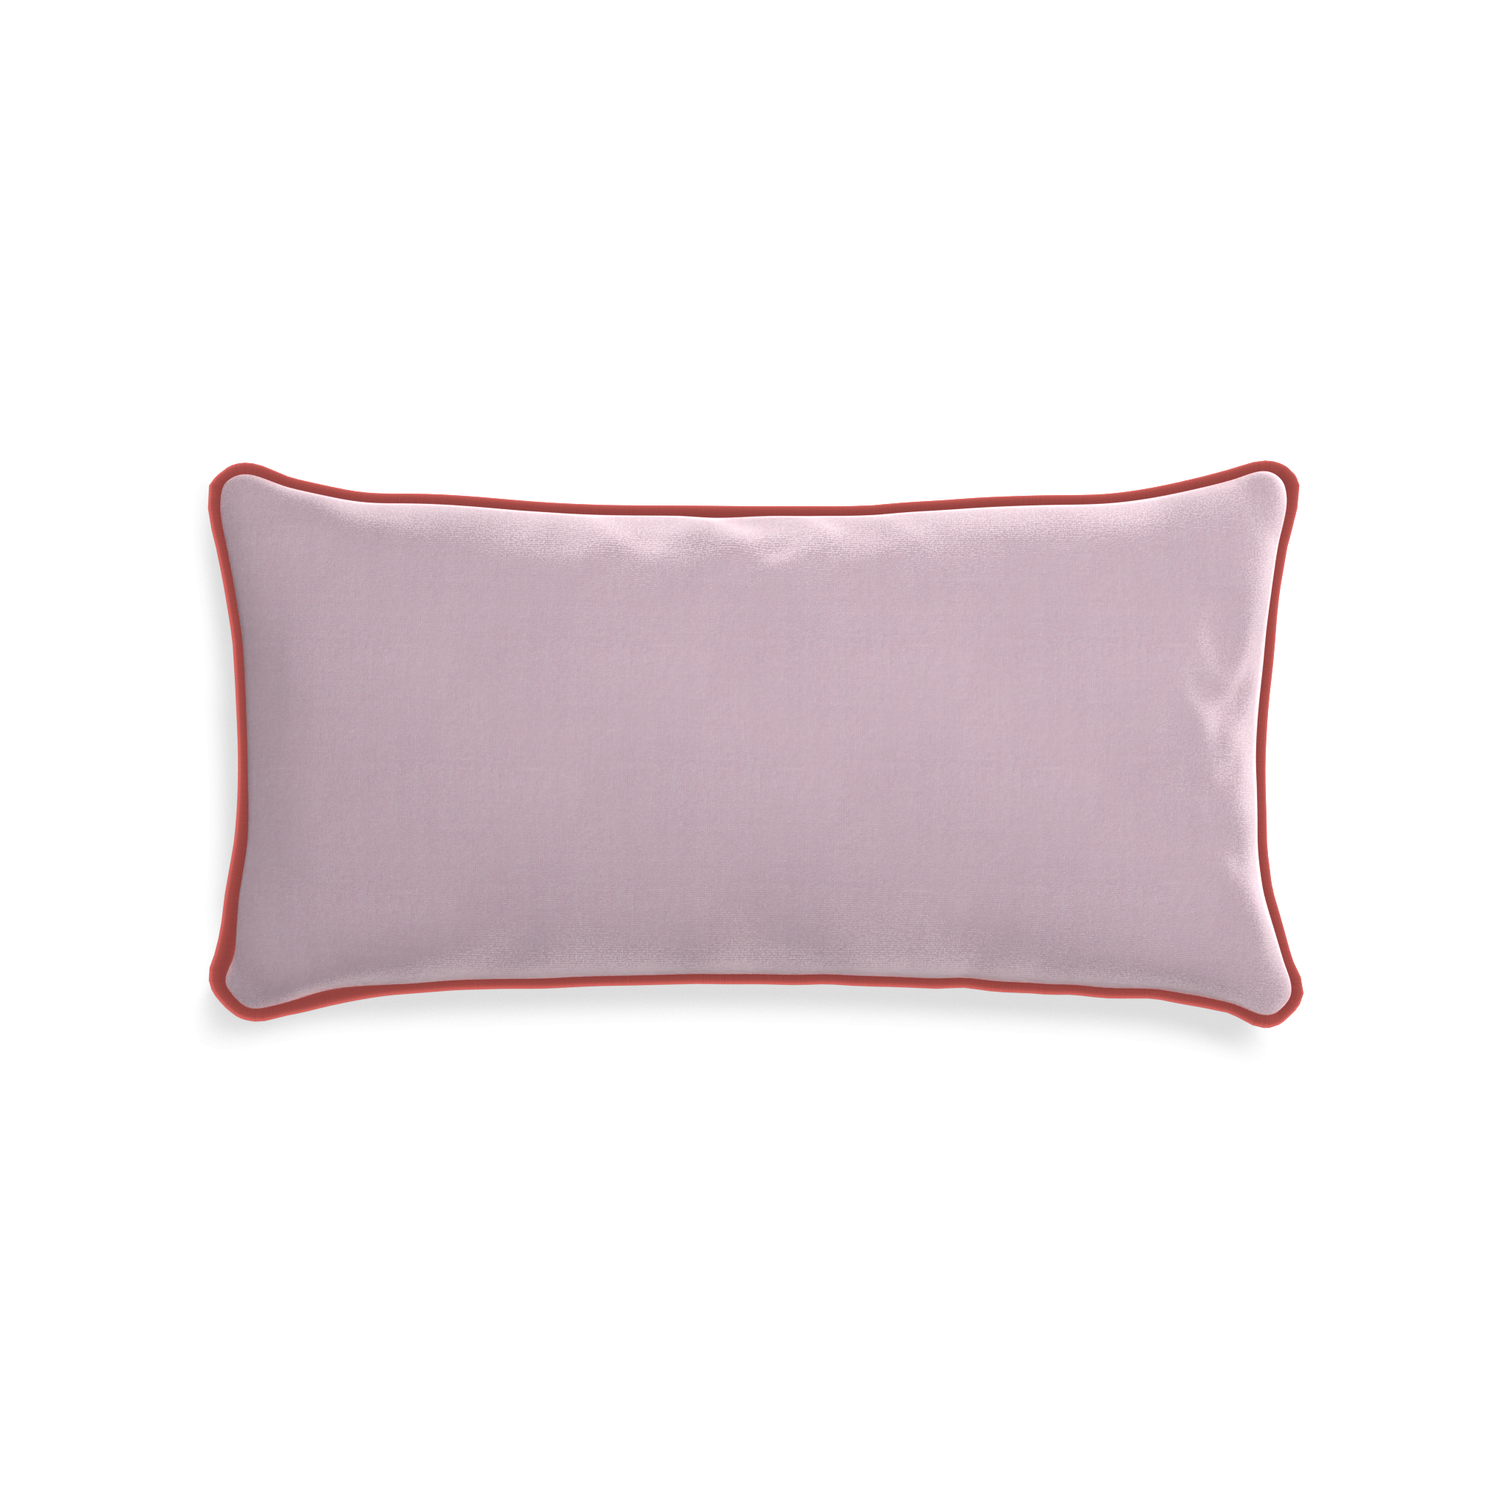 Midi-lumbar lilac velvet custom lilacpillow with c piping on white background